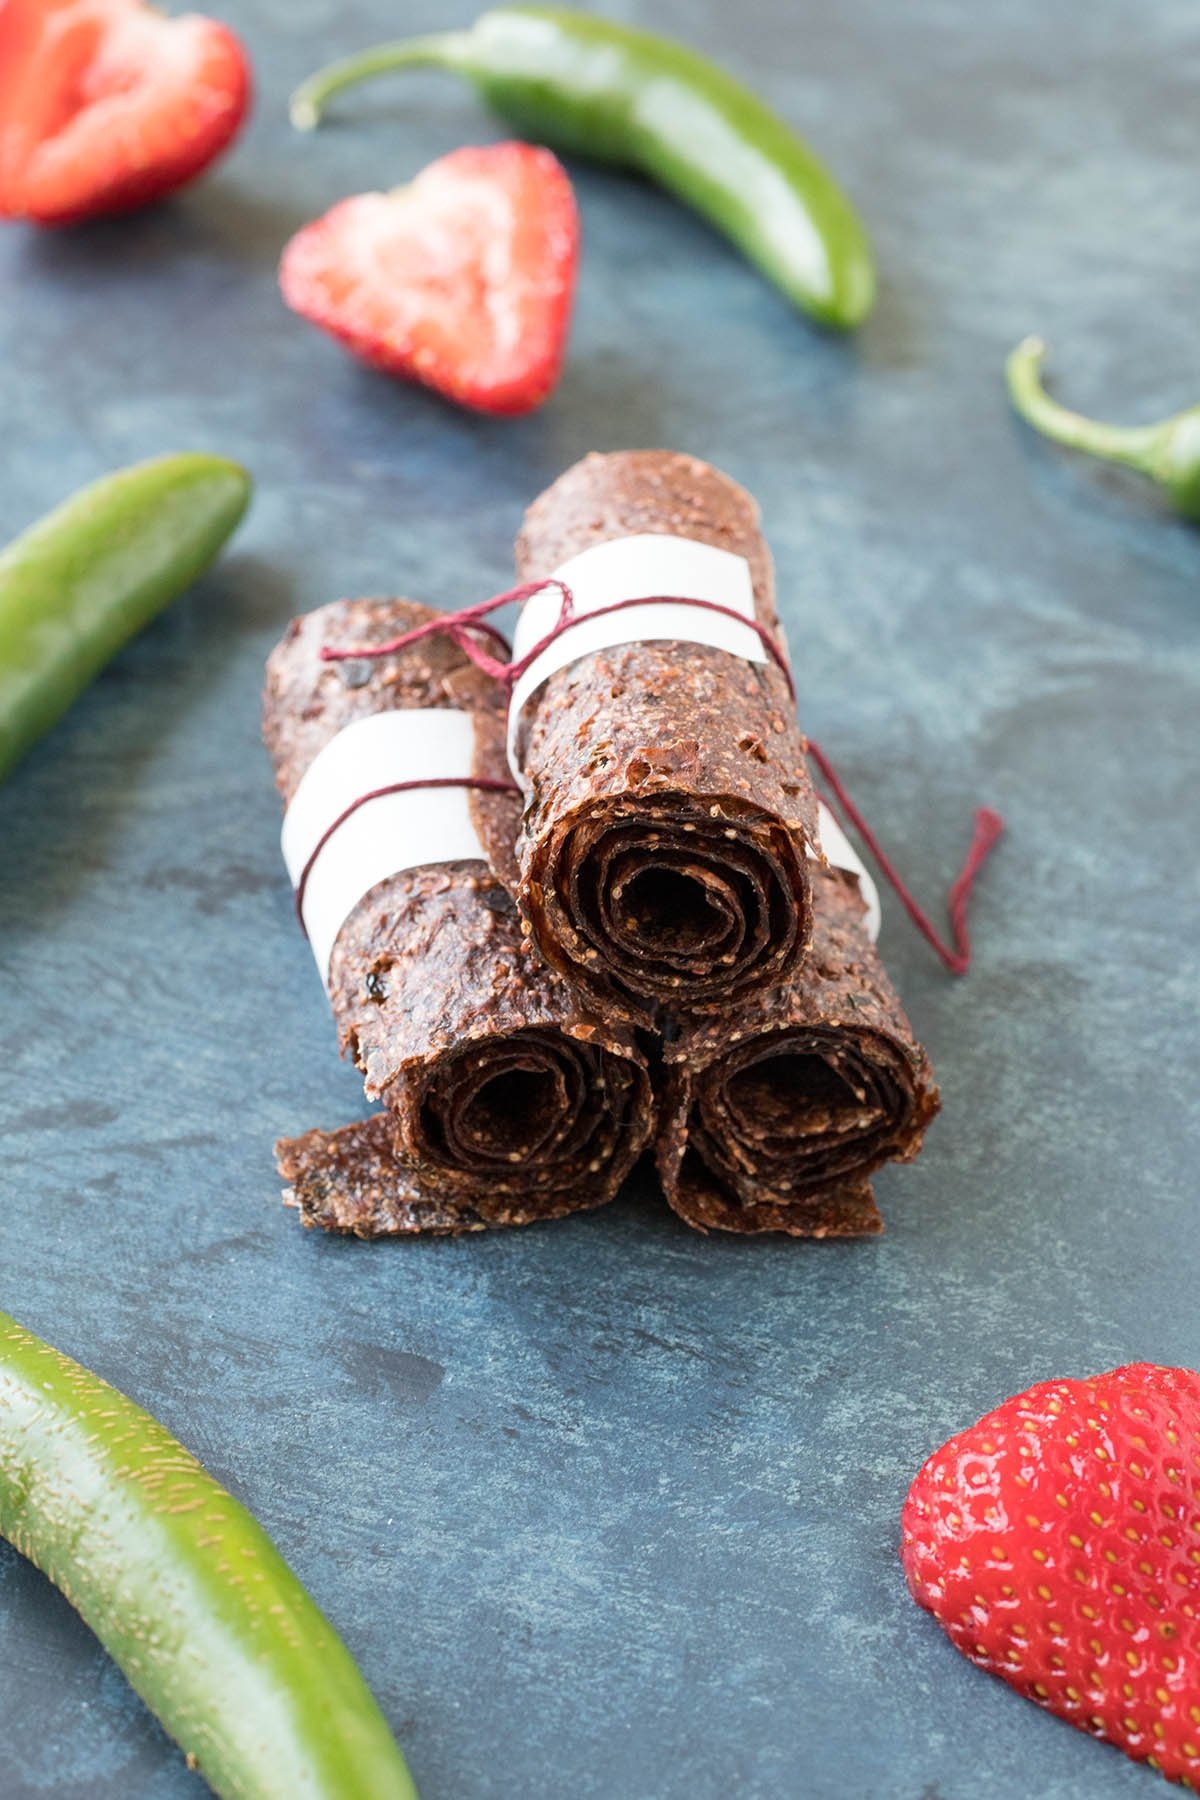 Spicy Strawberry Fruit Roll Ups served and looking inviting